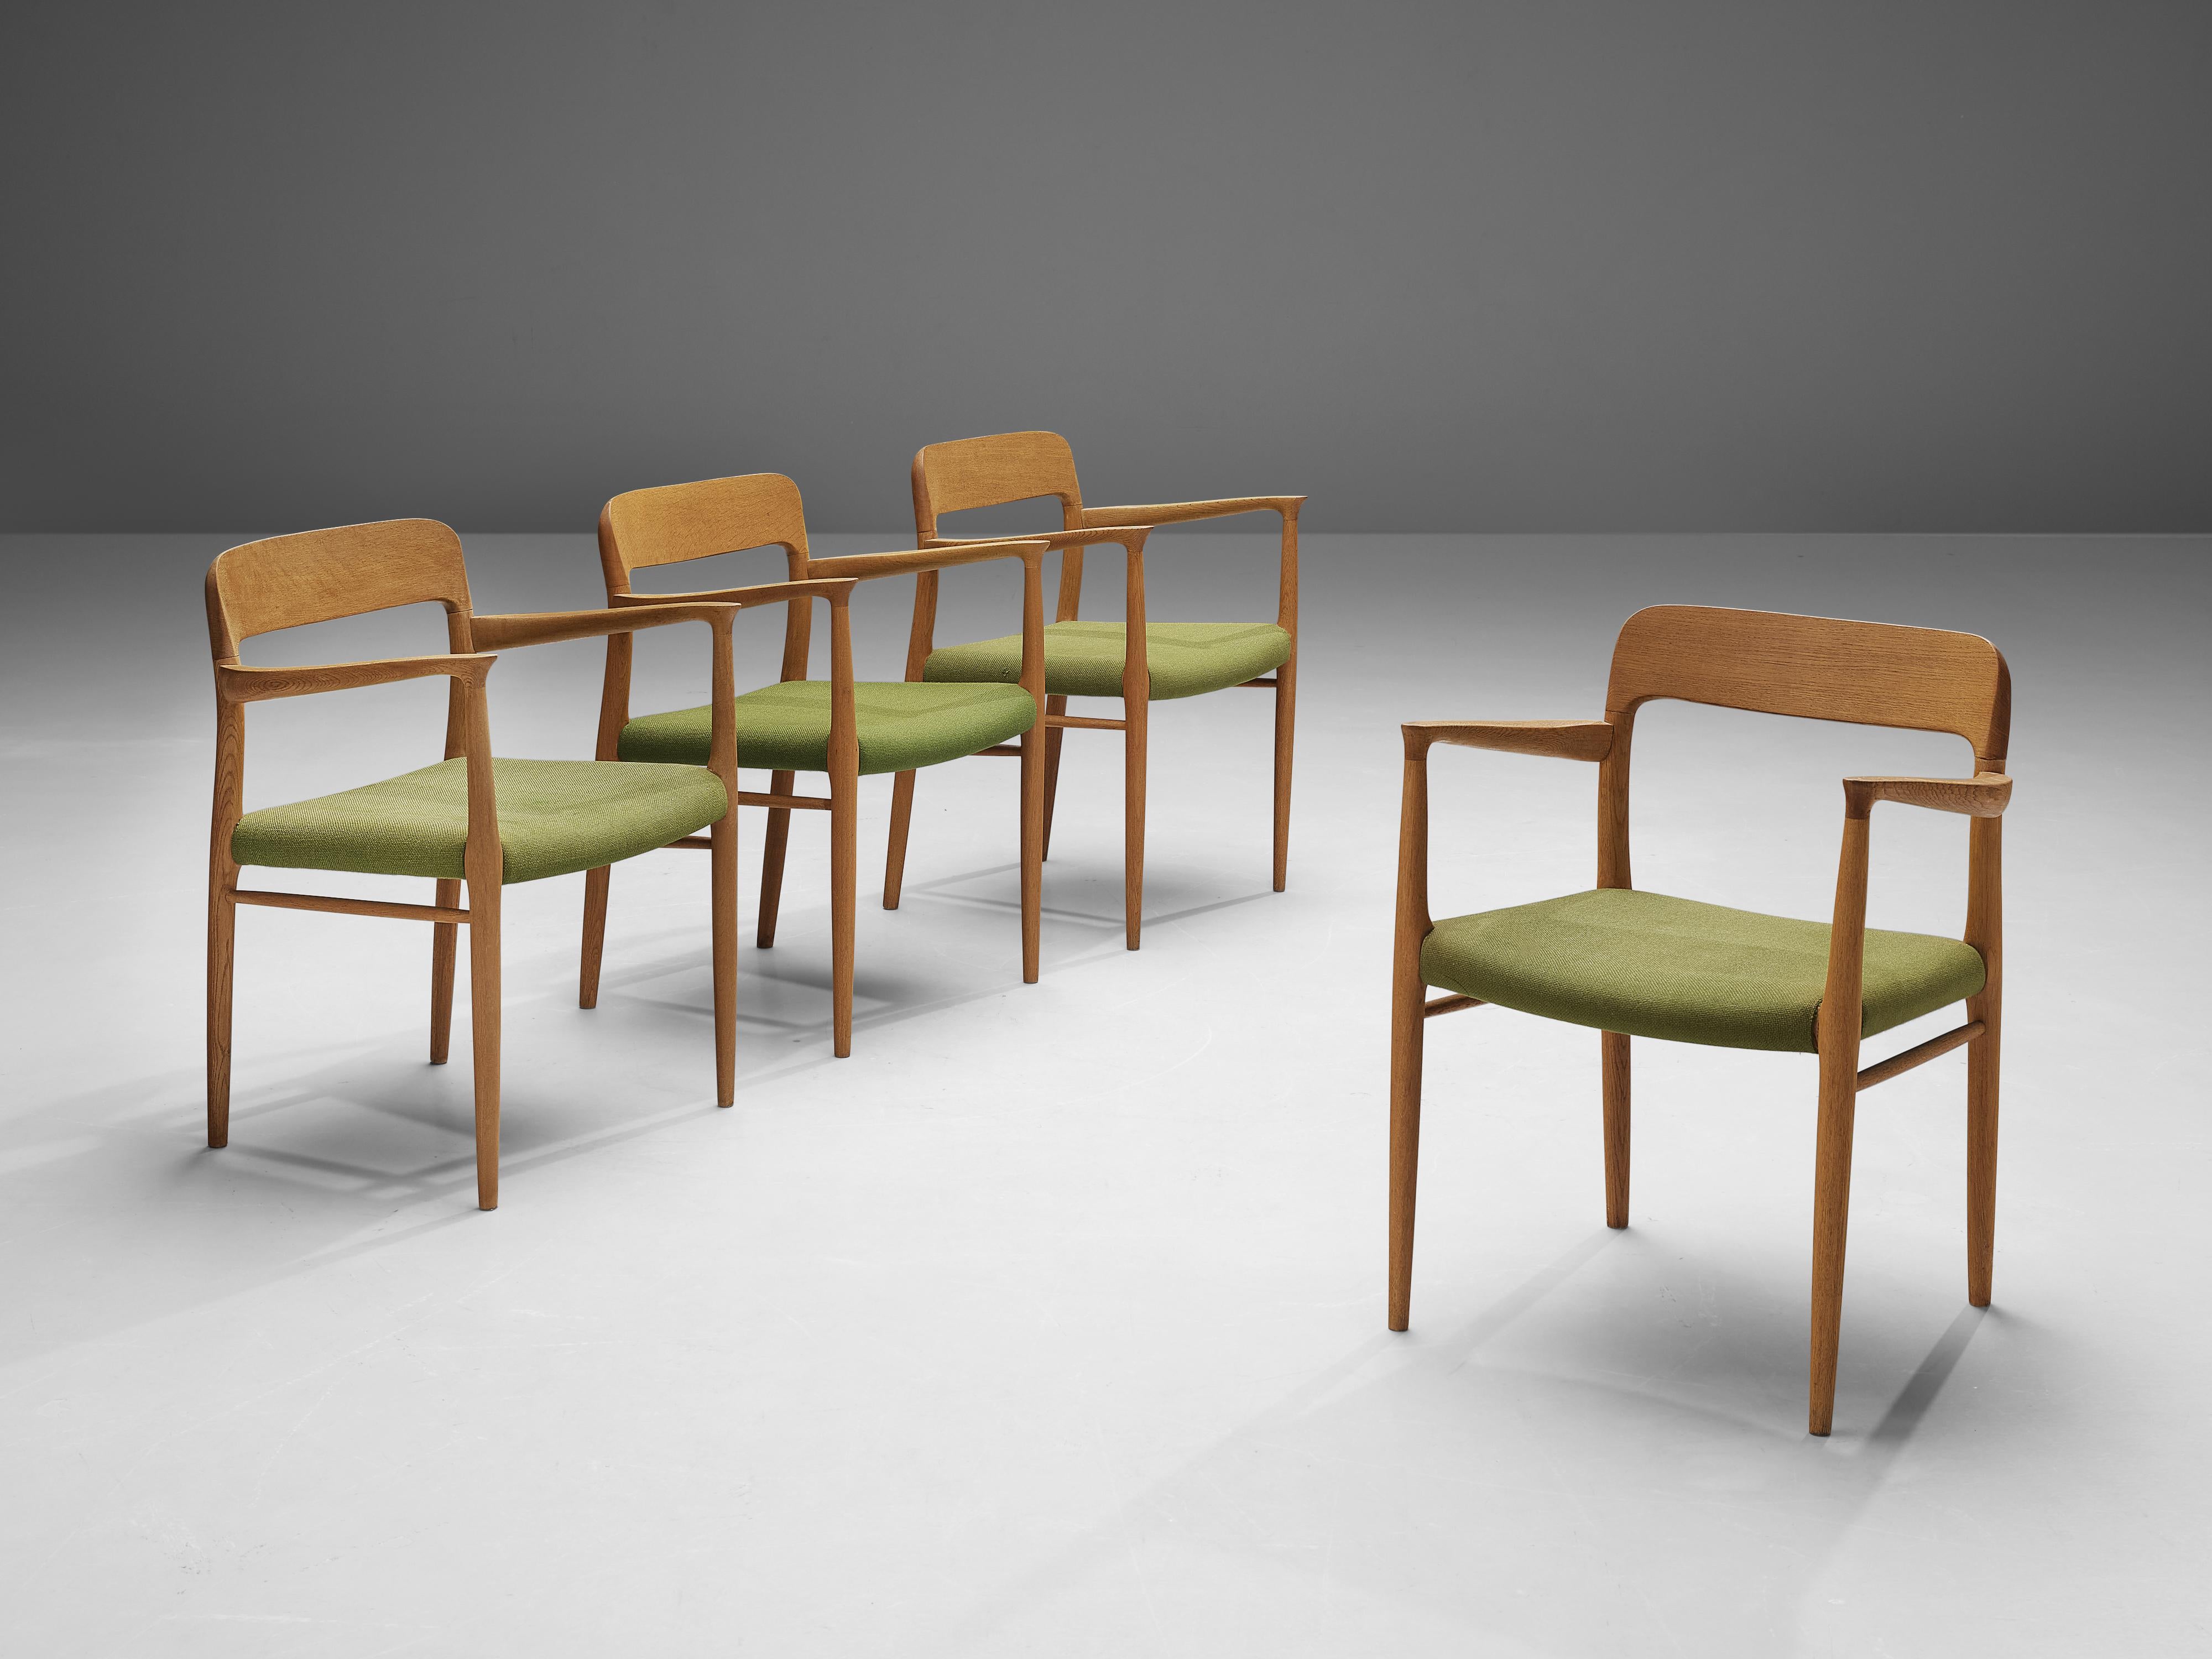 Niels Otto Møller for J. L. Møller, set of four dining chairs model ‘56’, oak, fabric, Denmark, 1954

This set of chairs shows subtle lines and beautiful curves in the woodwork. In the highly refined connections of the wood you can see the work of